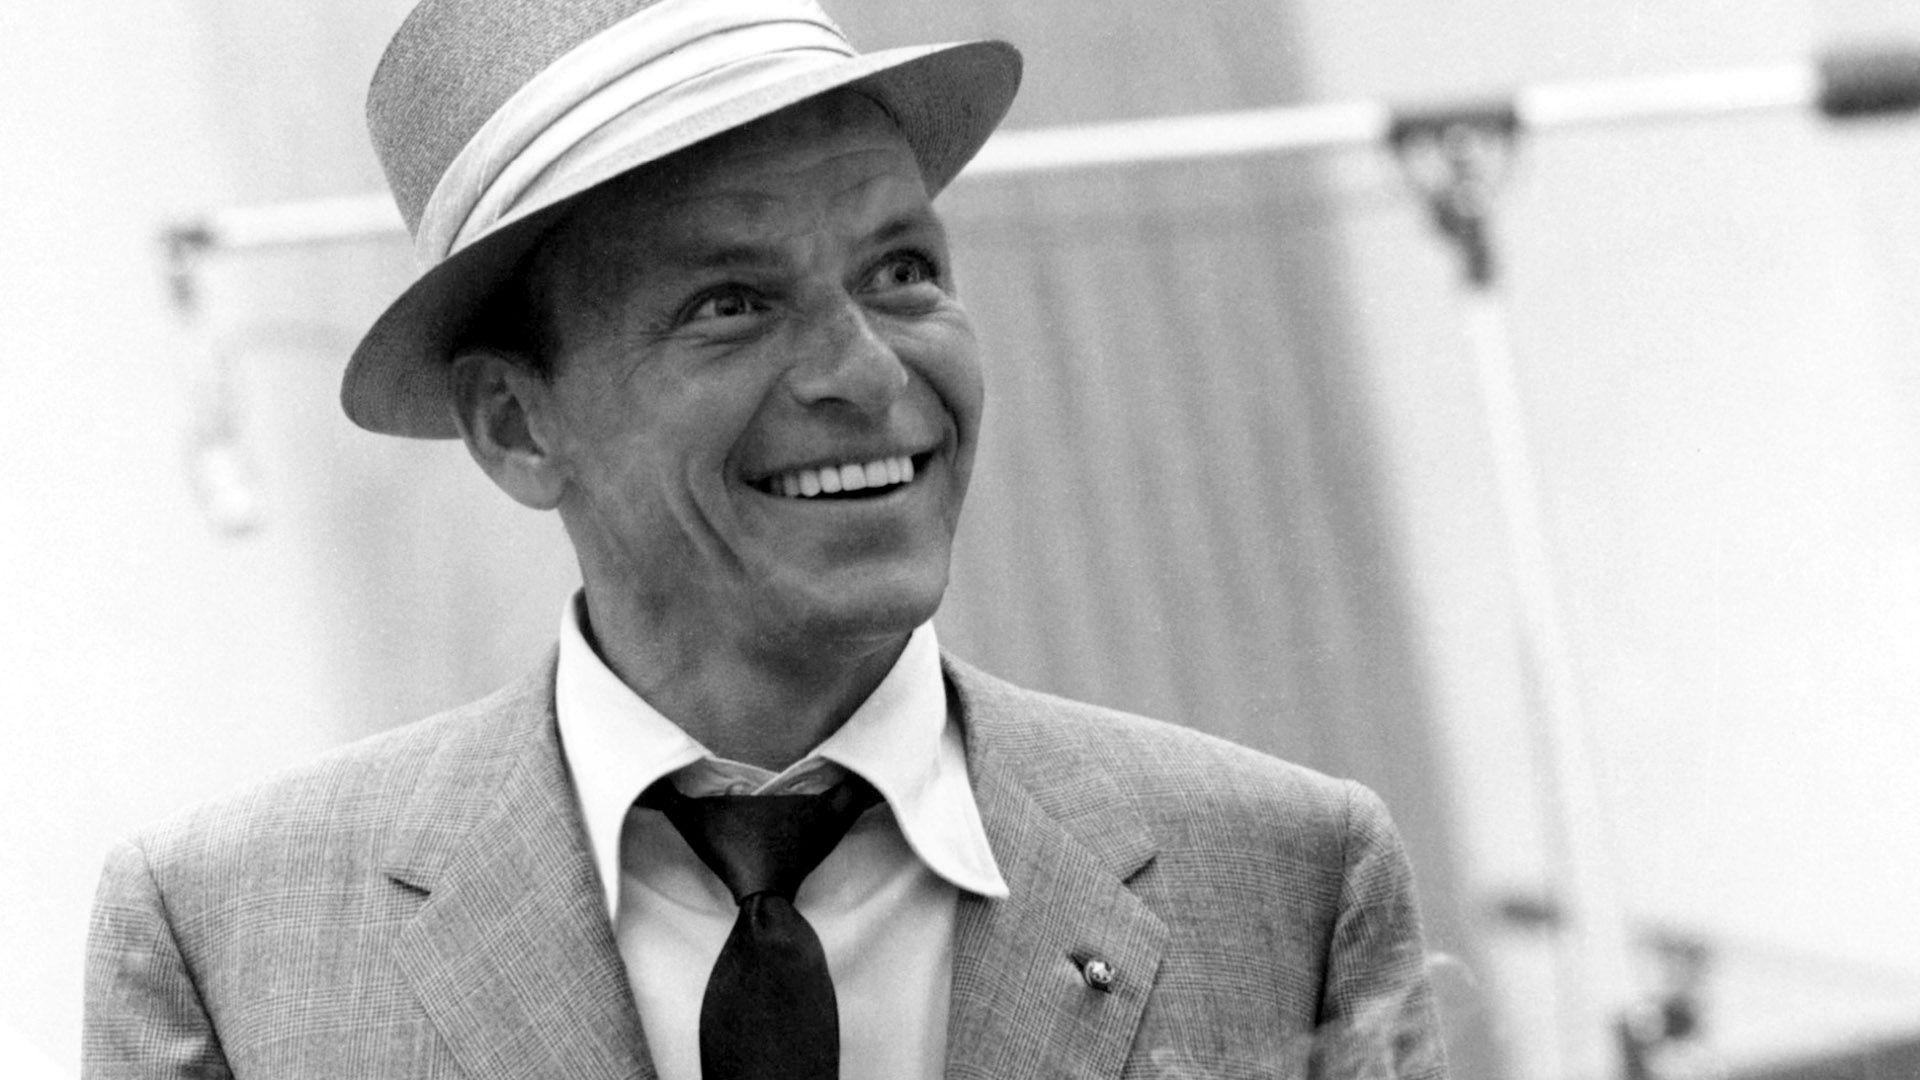 frank sinatra wallpapers images photos pictures backgrounds on frank sinatra wallpapers